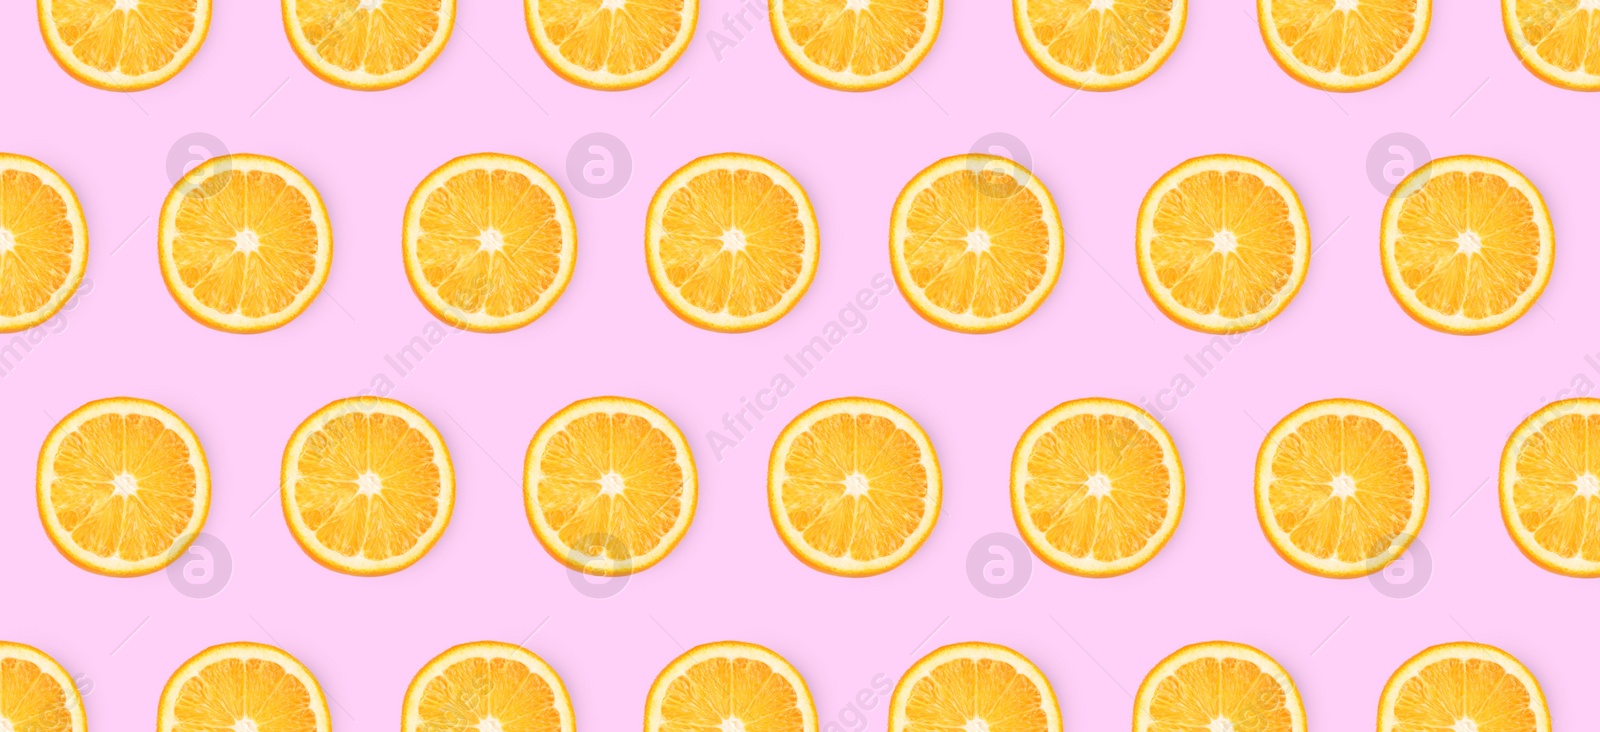 Image of Slices of oranges on pink background, flat lay. Banner design